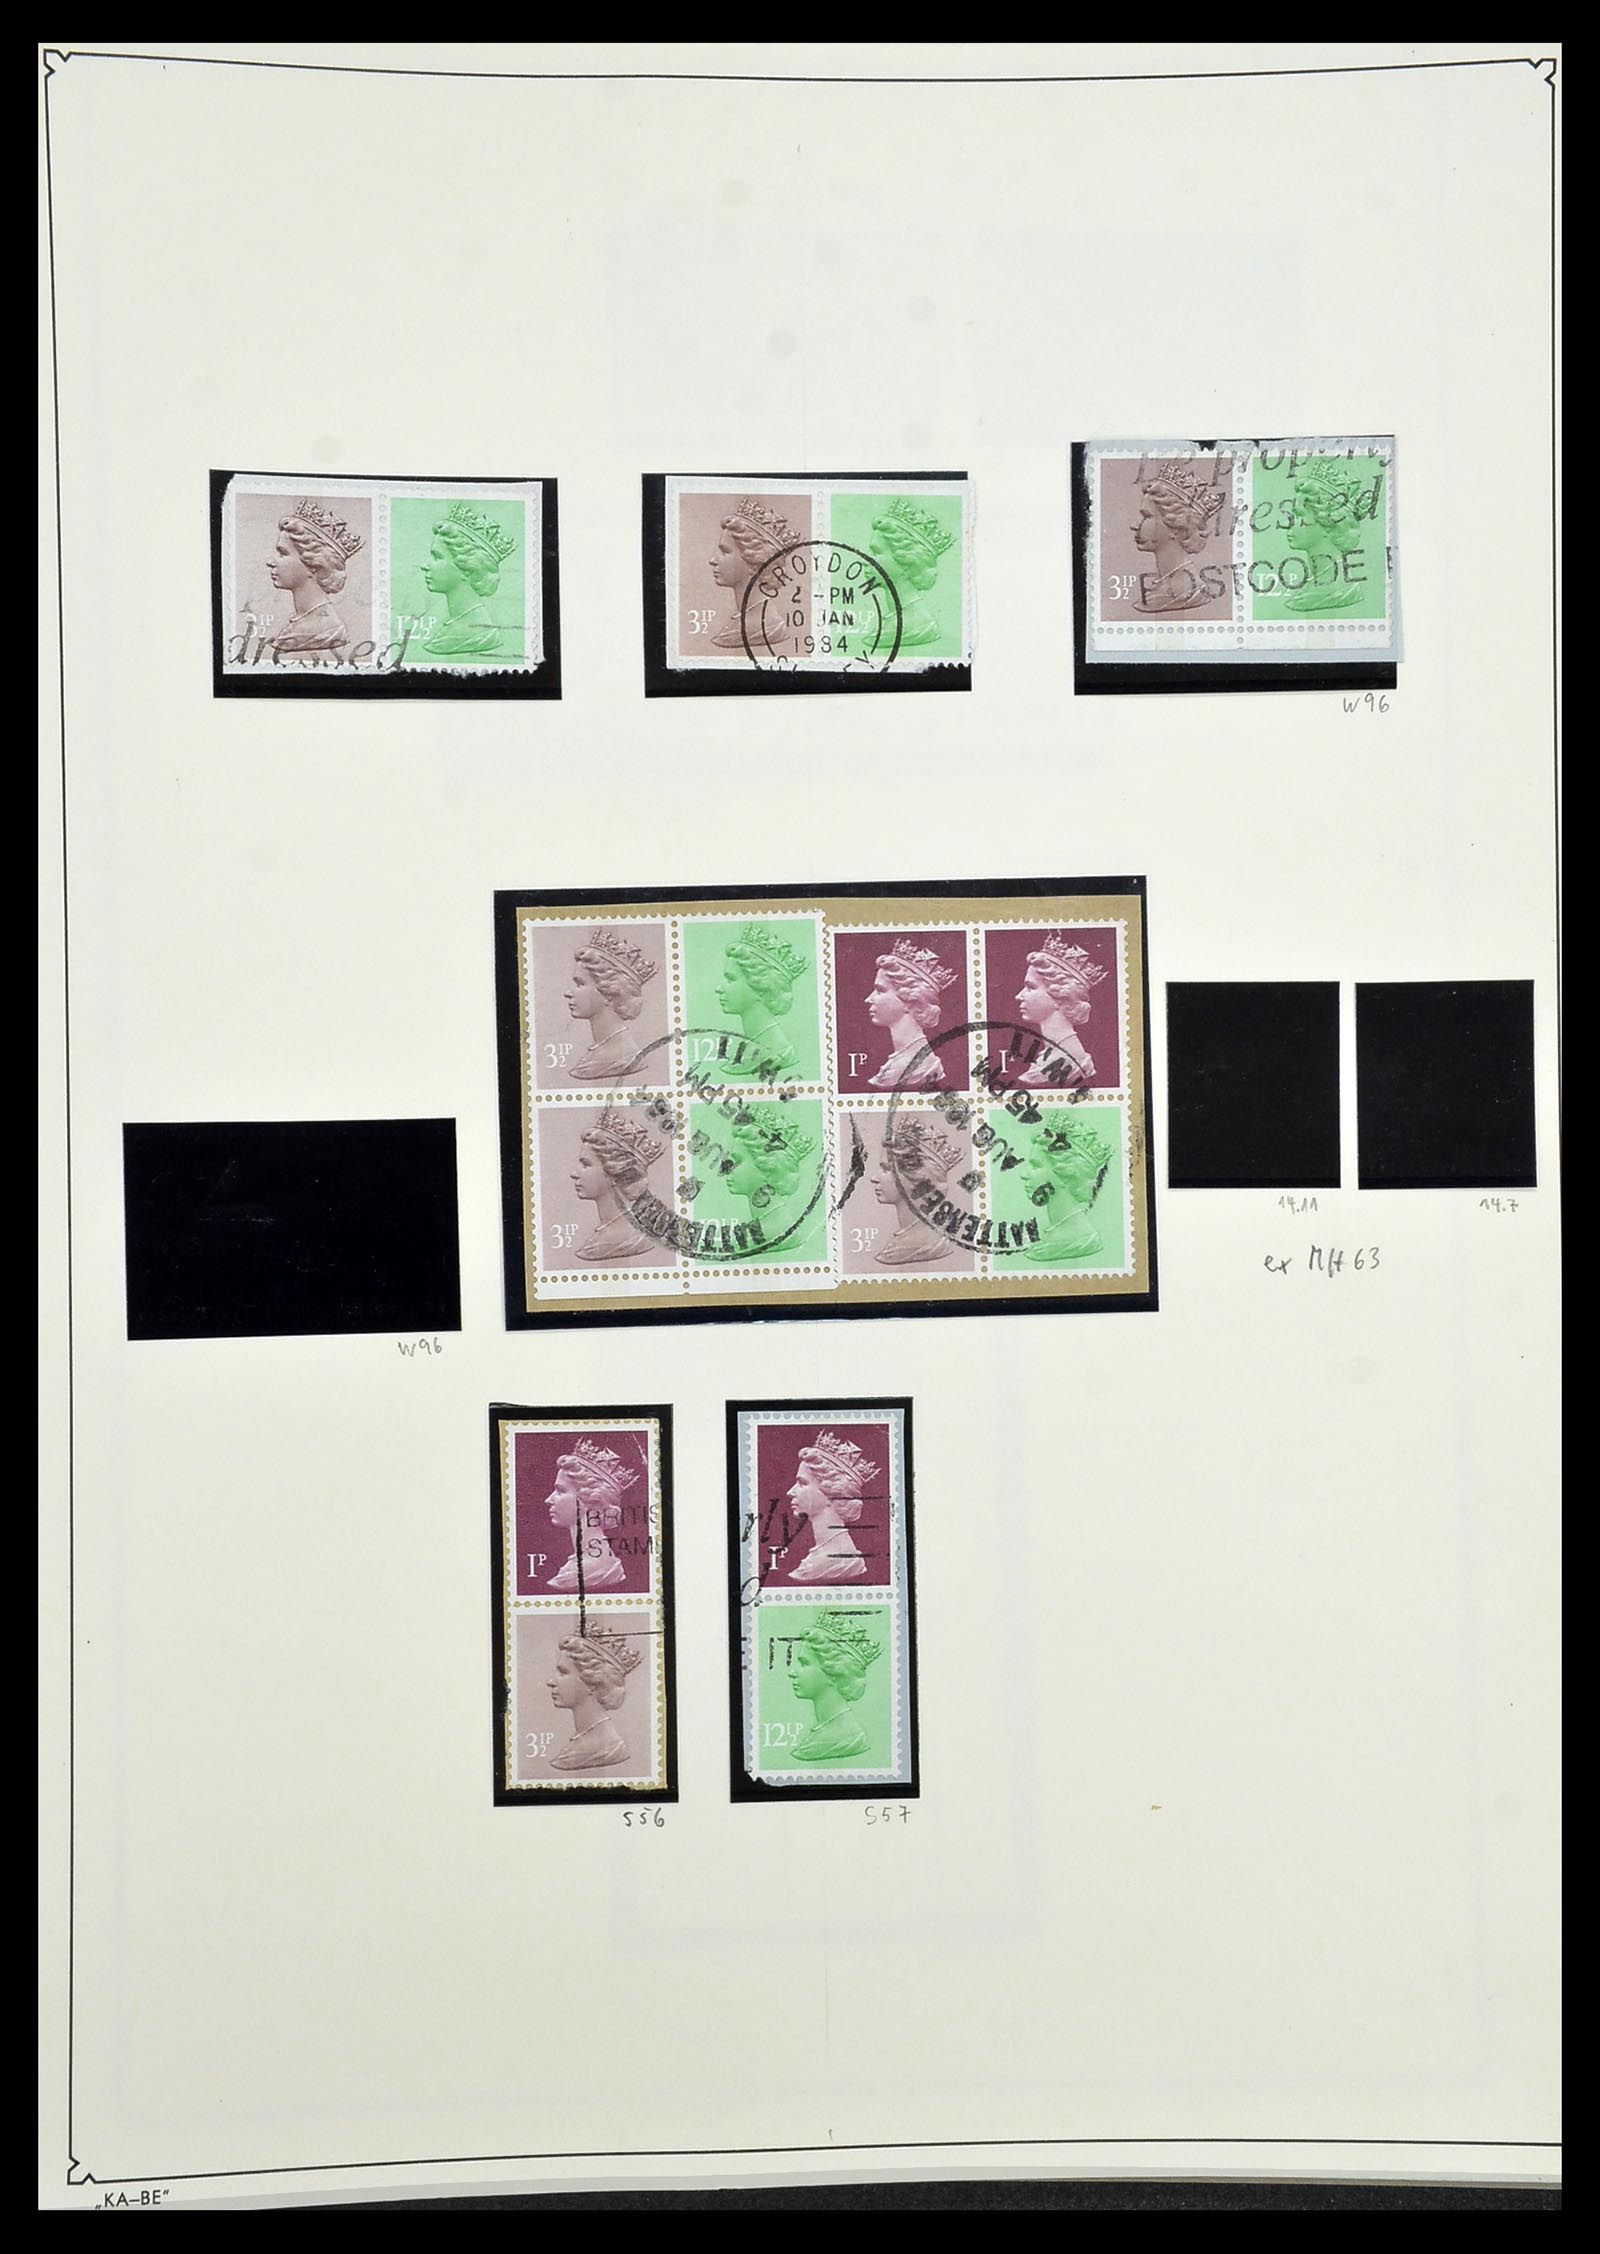 34221 203 - Stamp collection 34221 Great Britain Machins/castles 1971-2005.